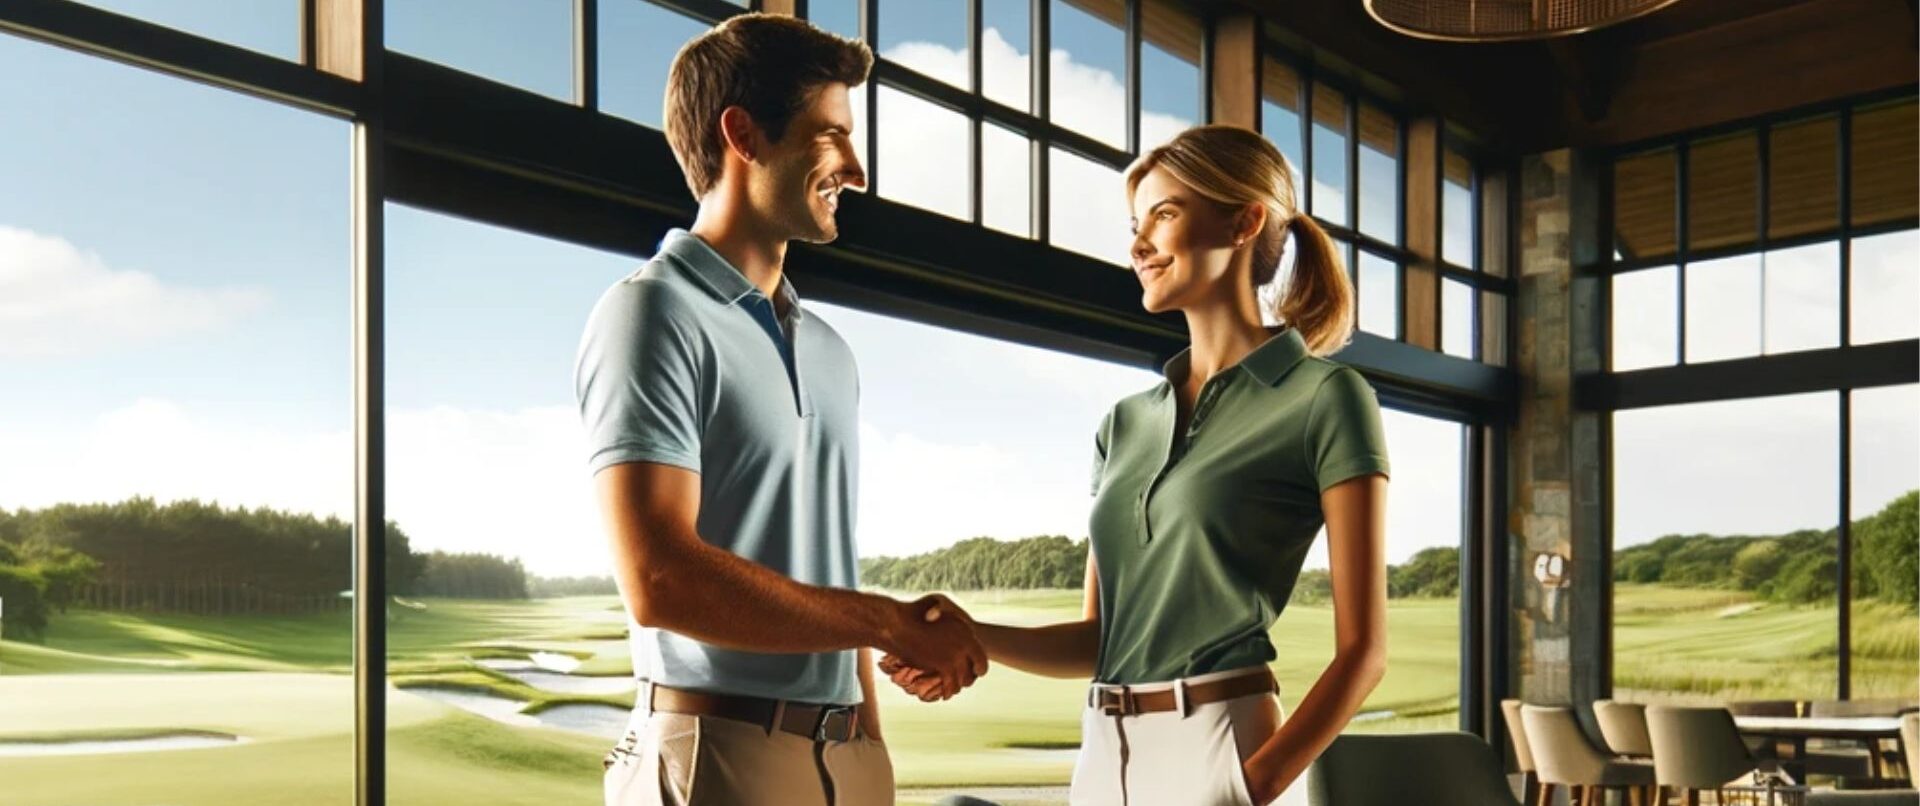 Golf managers handshake contra agreement